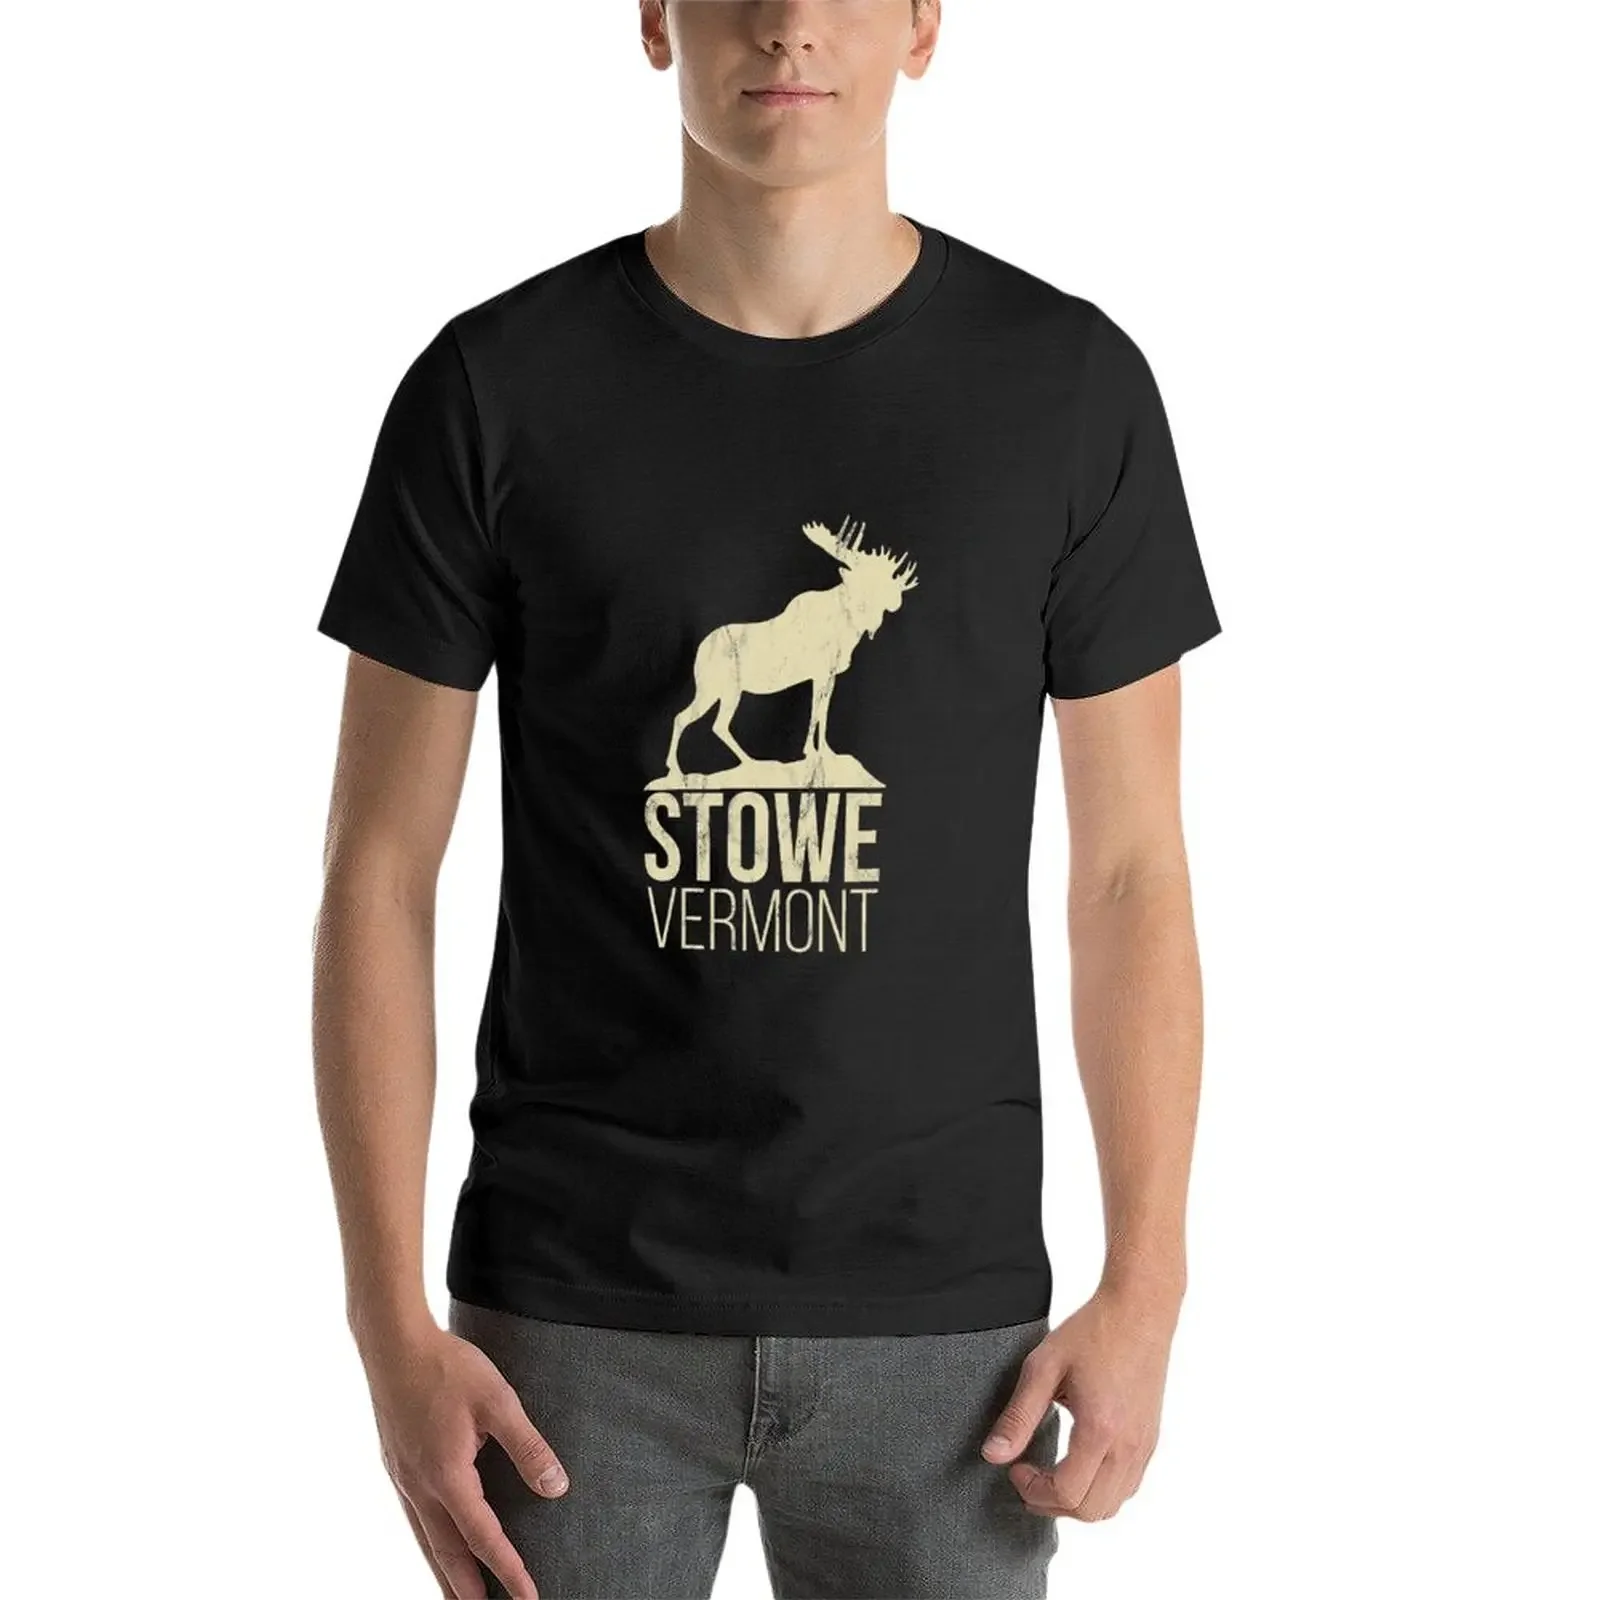 Stowe Vermont - Moose T-Shirt customizeds aesthetic clothes men clothings